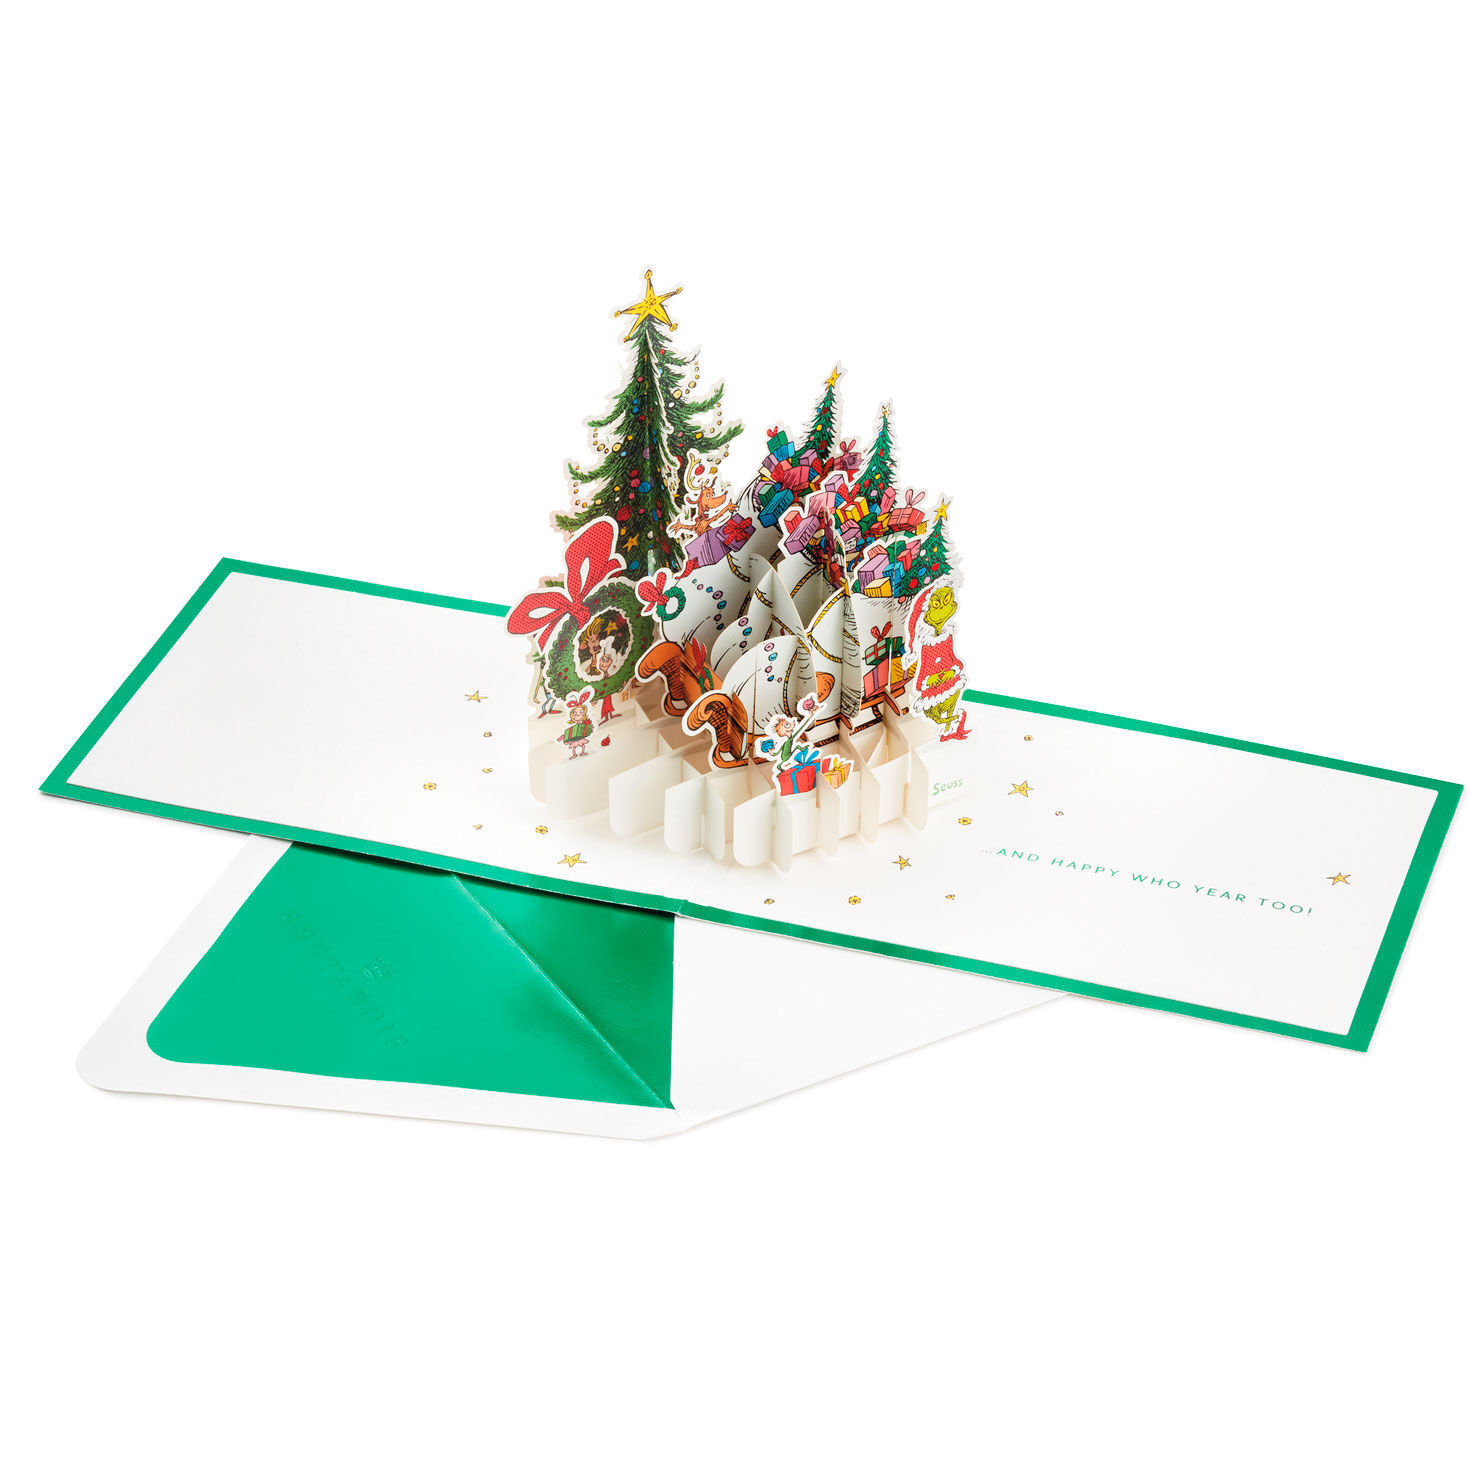 3D Pop-Out Snow Globe Design Christmas Card for Mum & Dad from Hallmark 